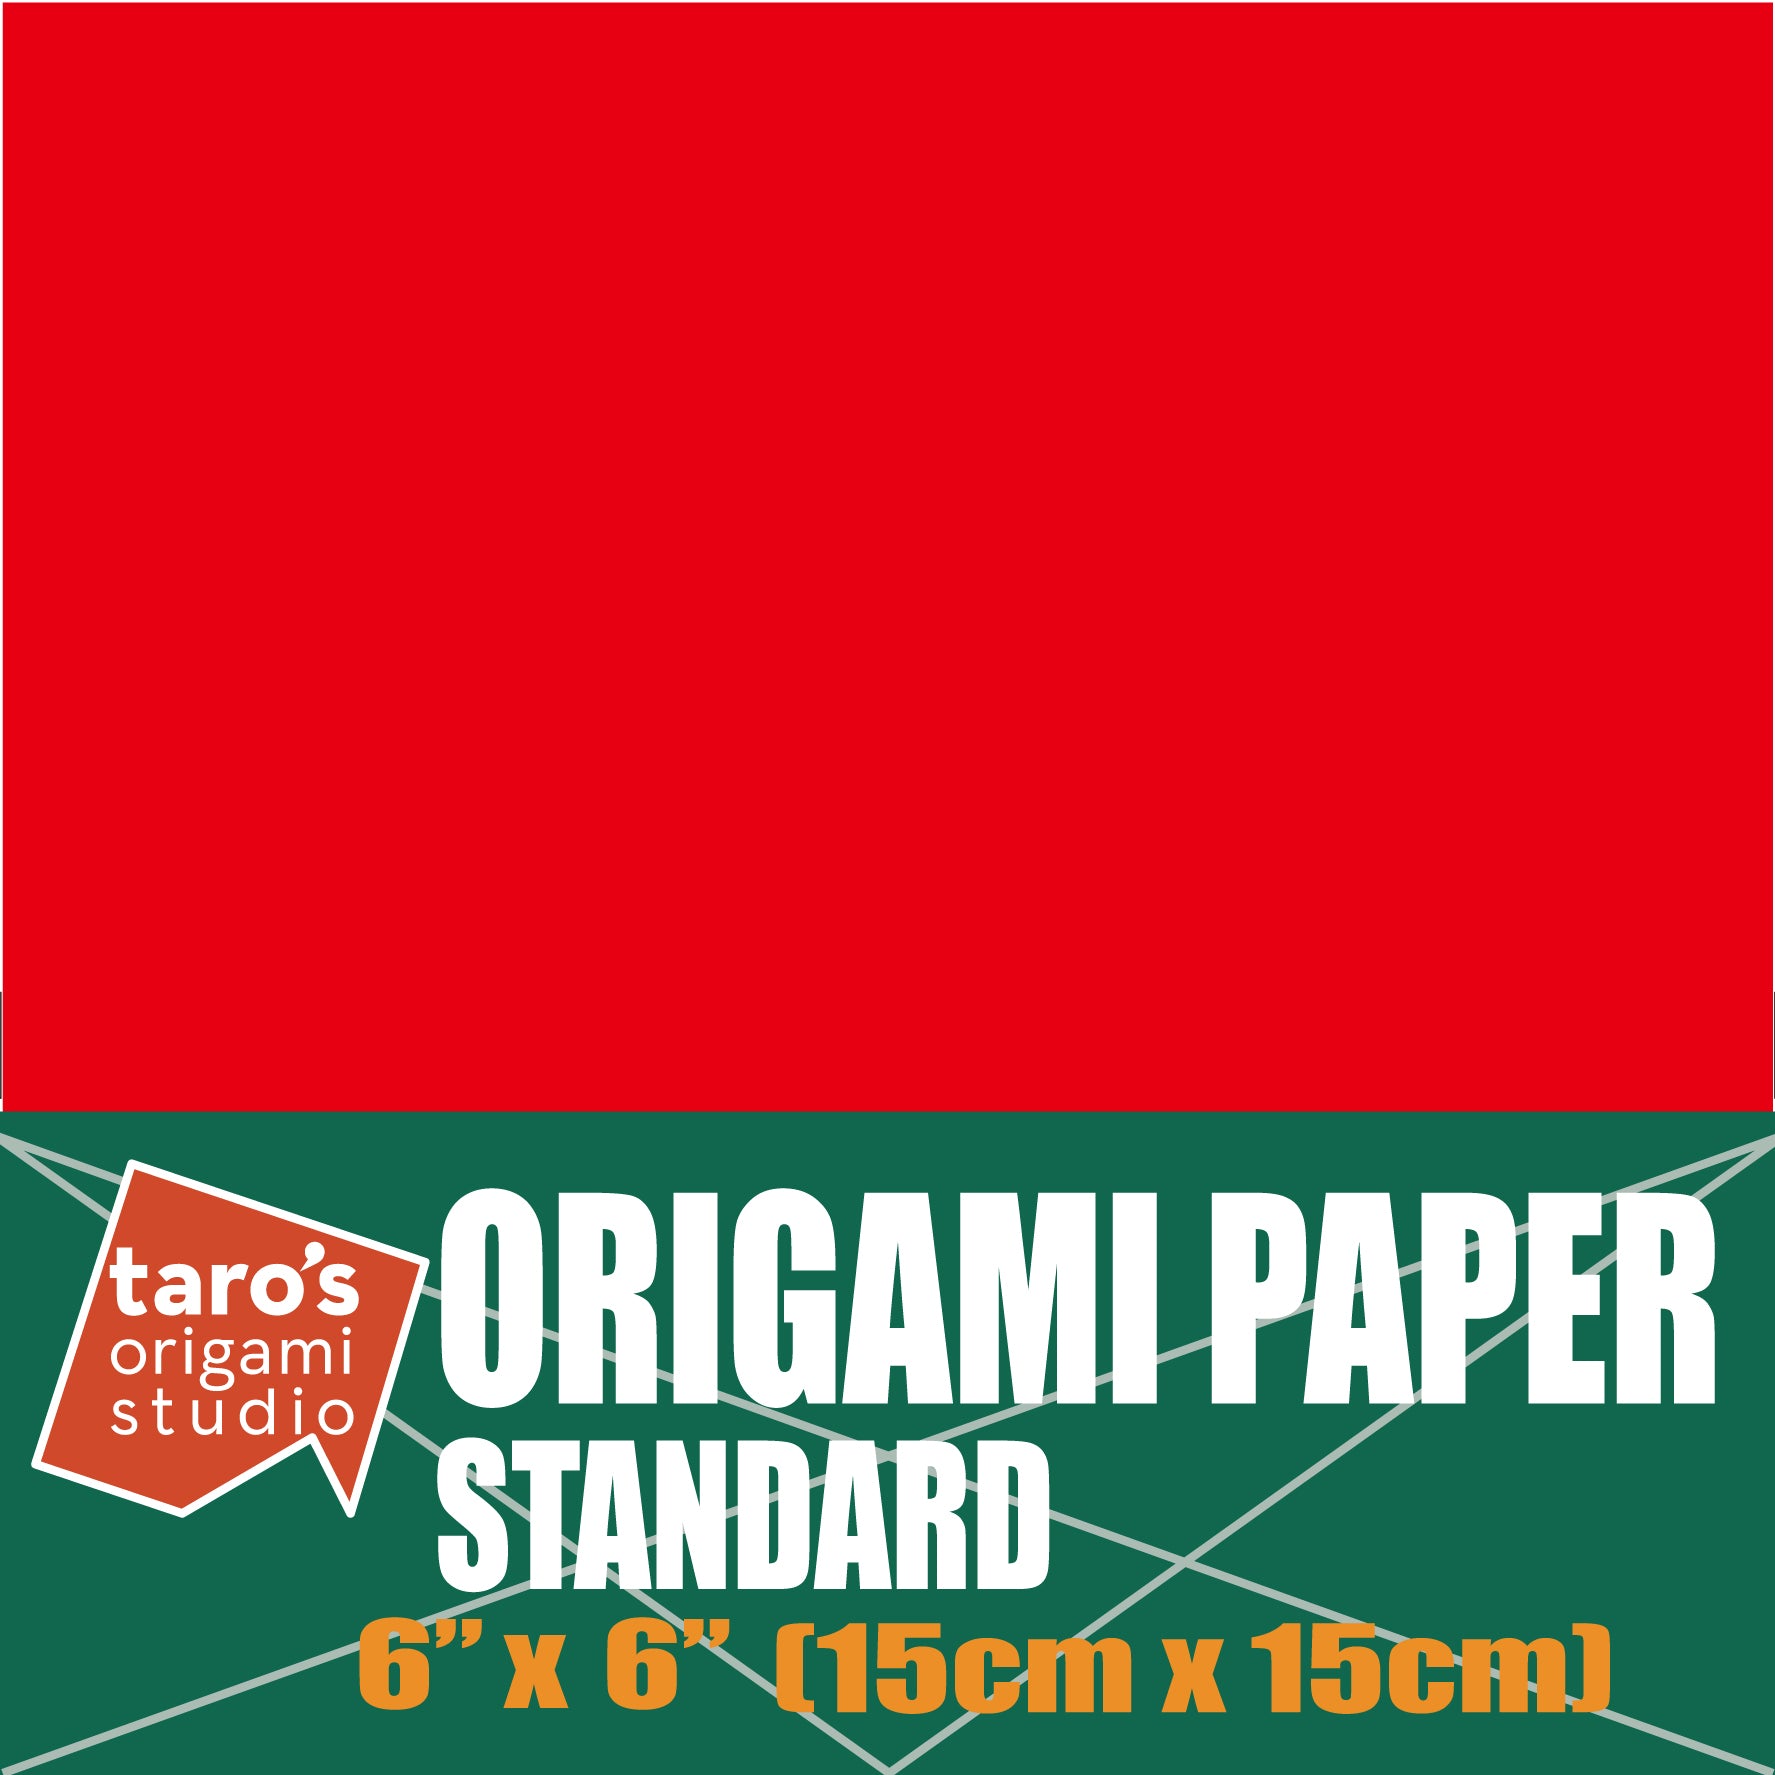 Standard 6 Inch One Sided Single Colors (Red) 50 Sheets (All Same Color)  Square Easy Fold Premium Japanese Paper for Beginner - Taro's Origami  Studio E-learning and Shop